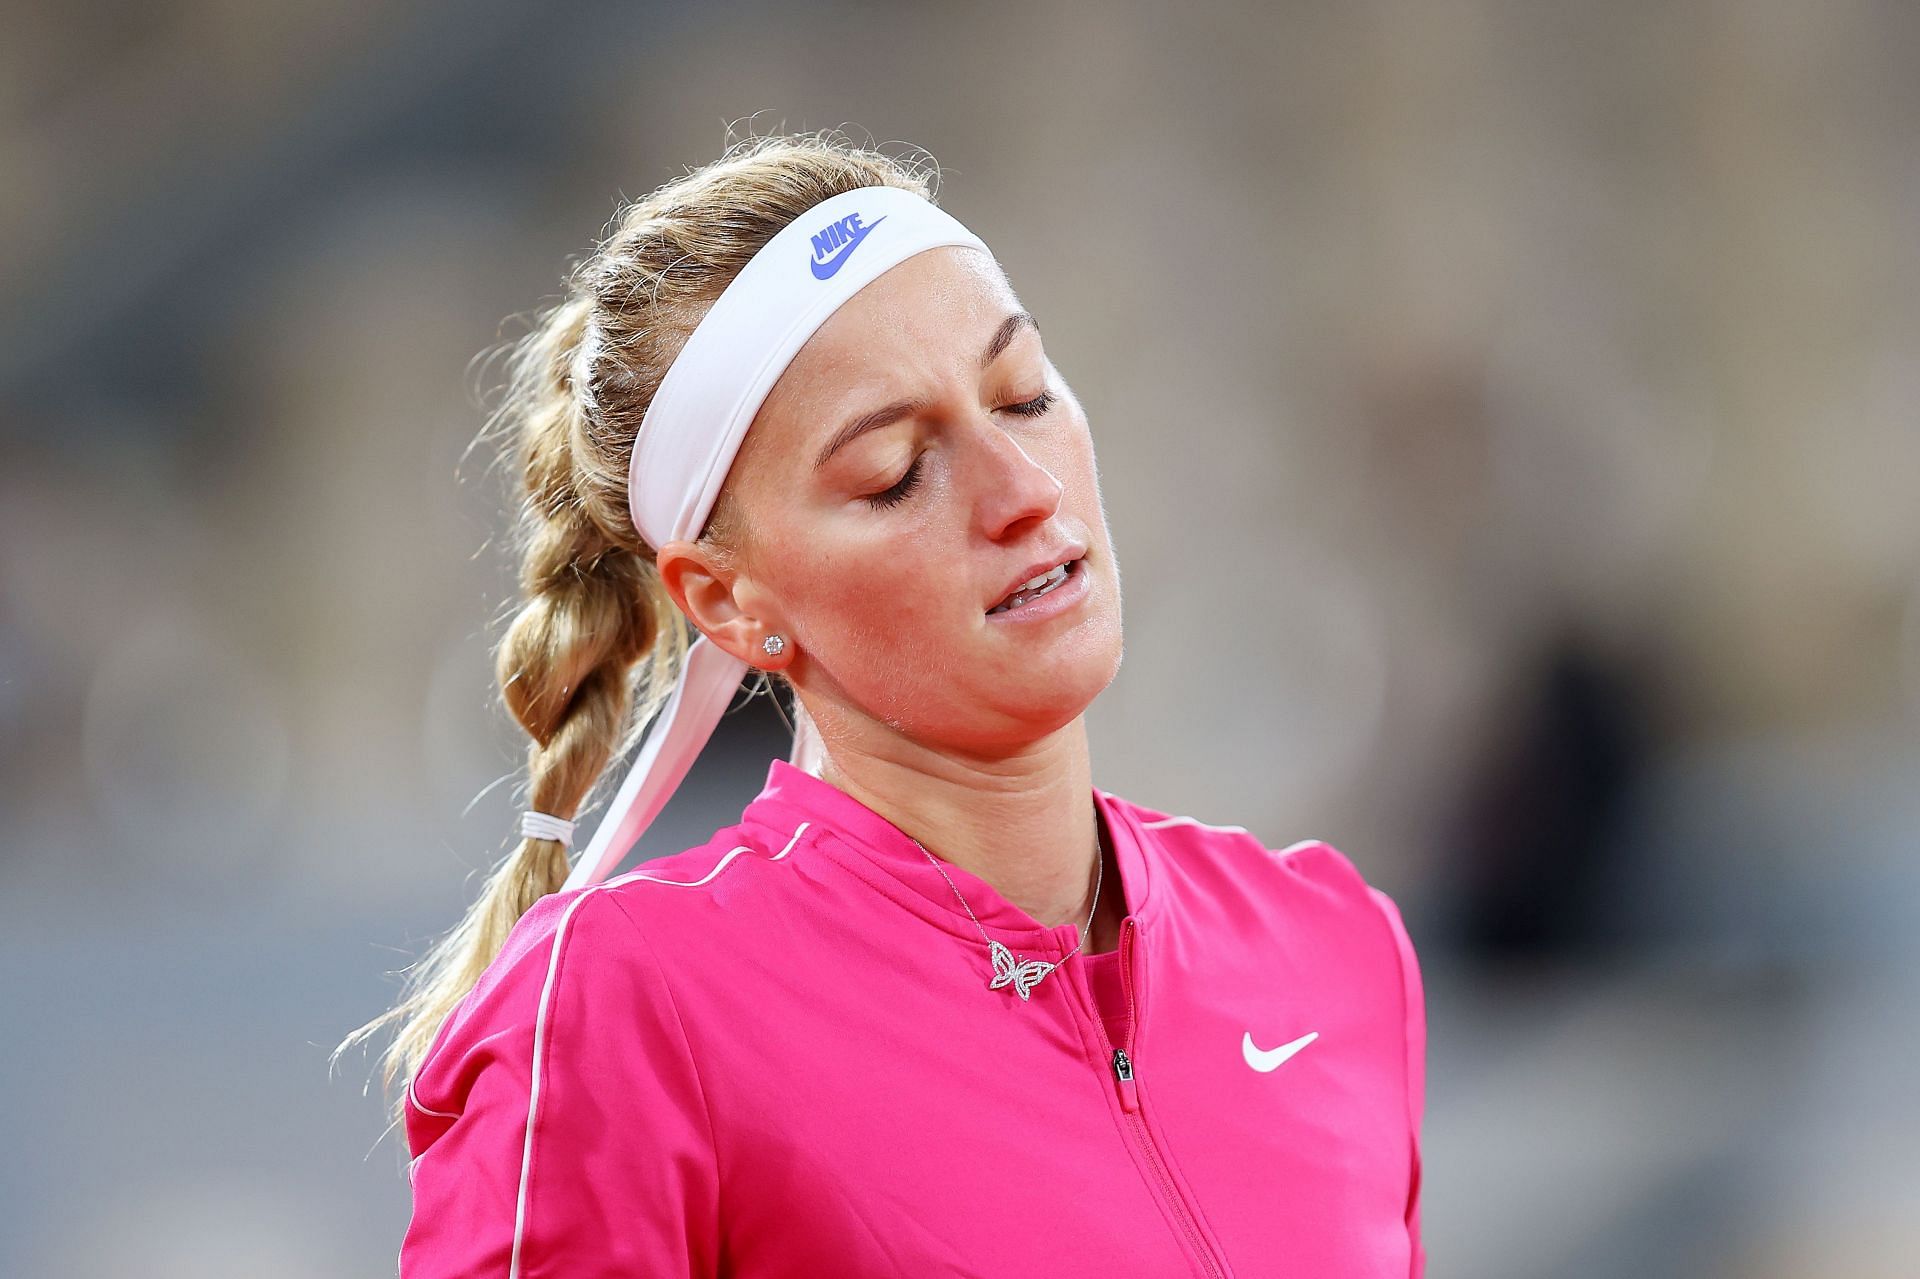 Kvitova will be looking to end her poor run of form in Paris.